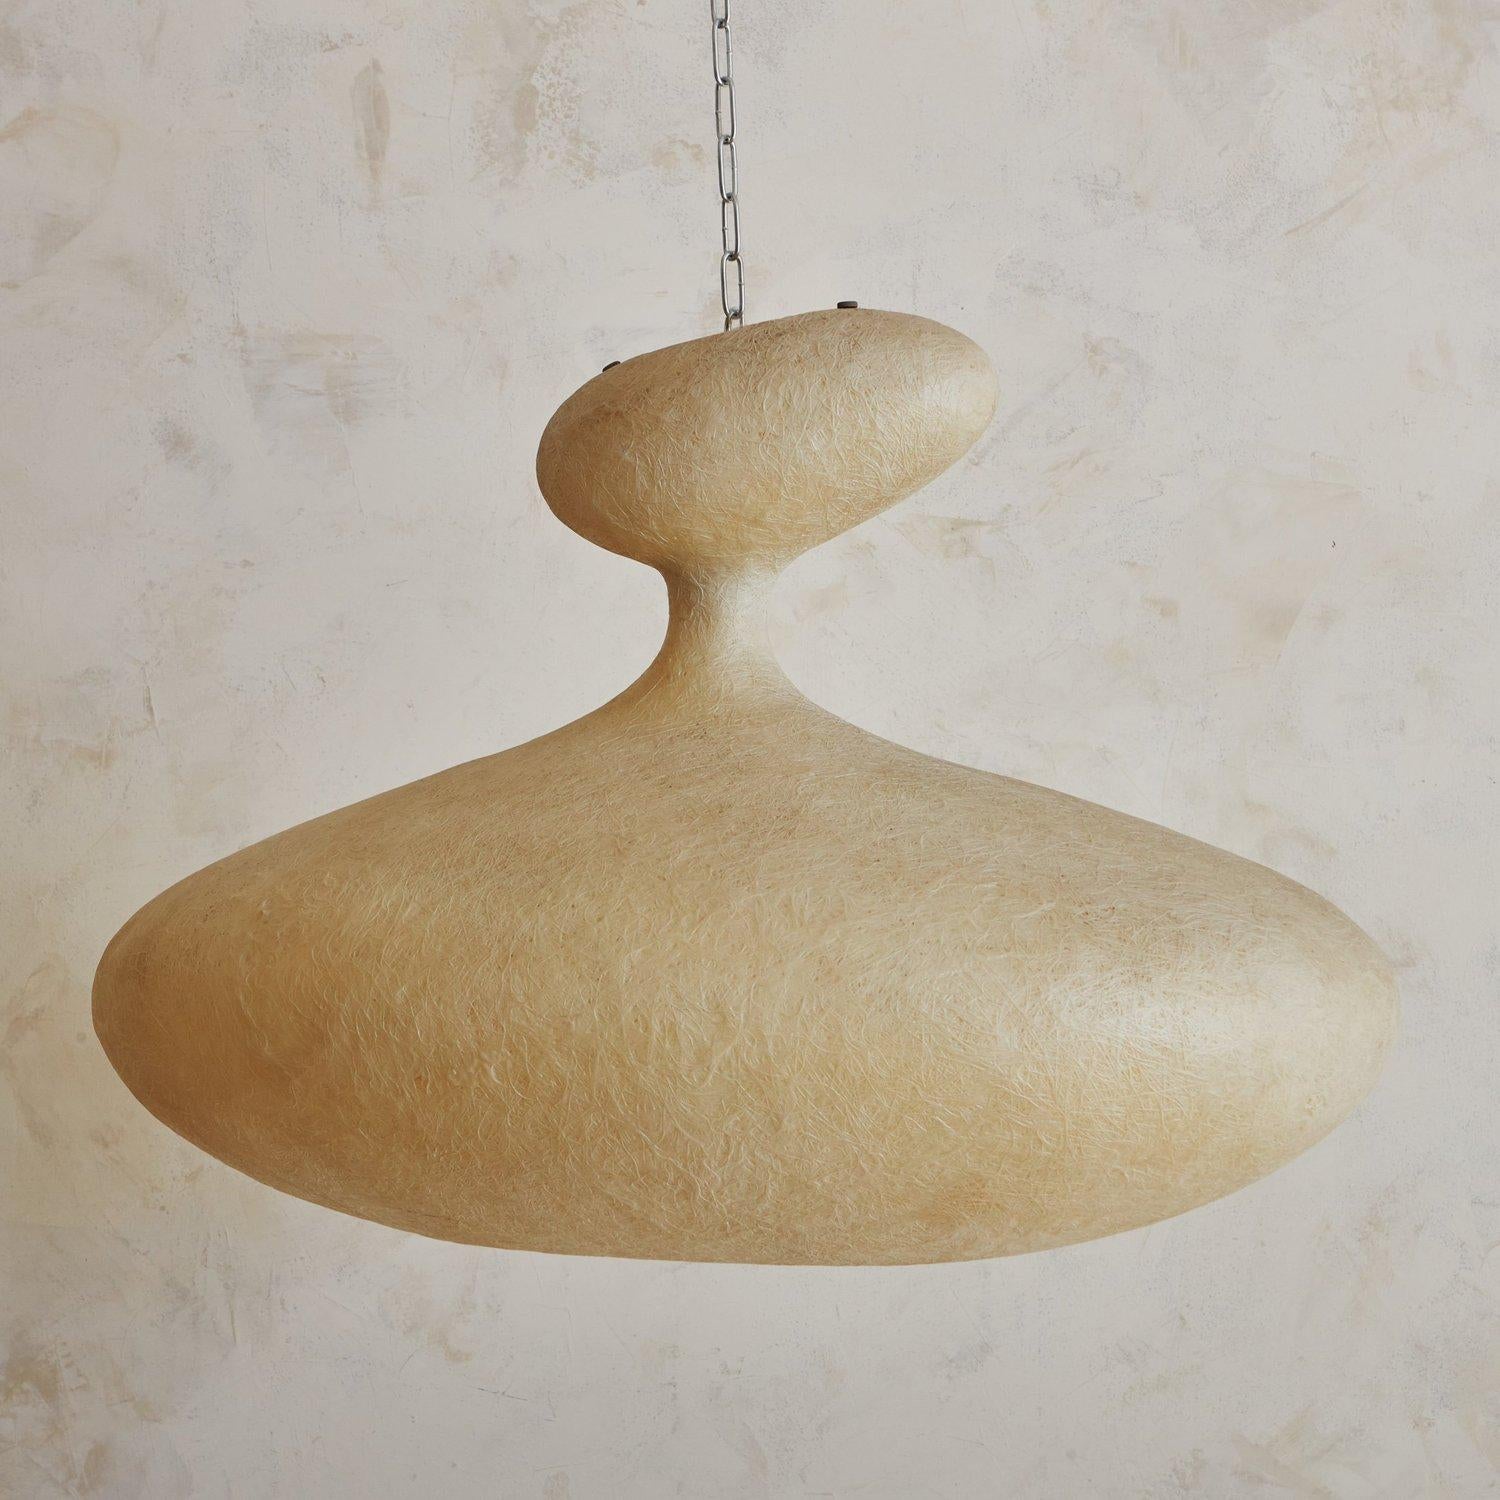 An Italian E.T.A. SAT pendant light designed by Guglielmo Berchicci for Kundalini in the 1970s. This striking piece features a fiberglass shade with soft, organic curves and an asymmetrical silhouette. It has a metallic frame, a polycarbonate